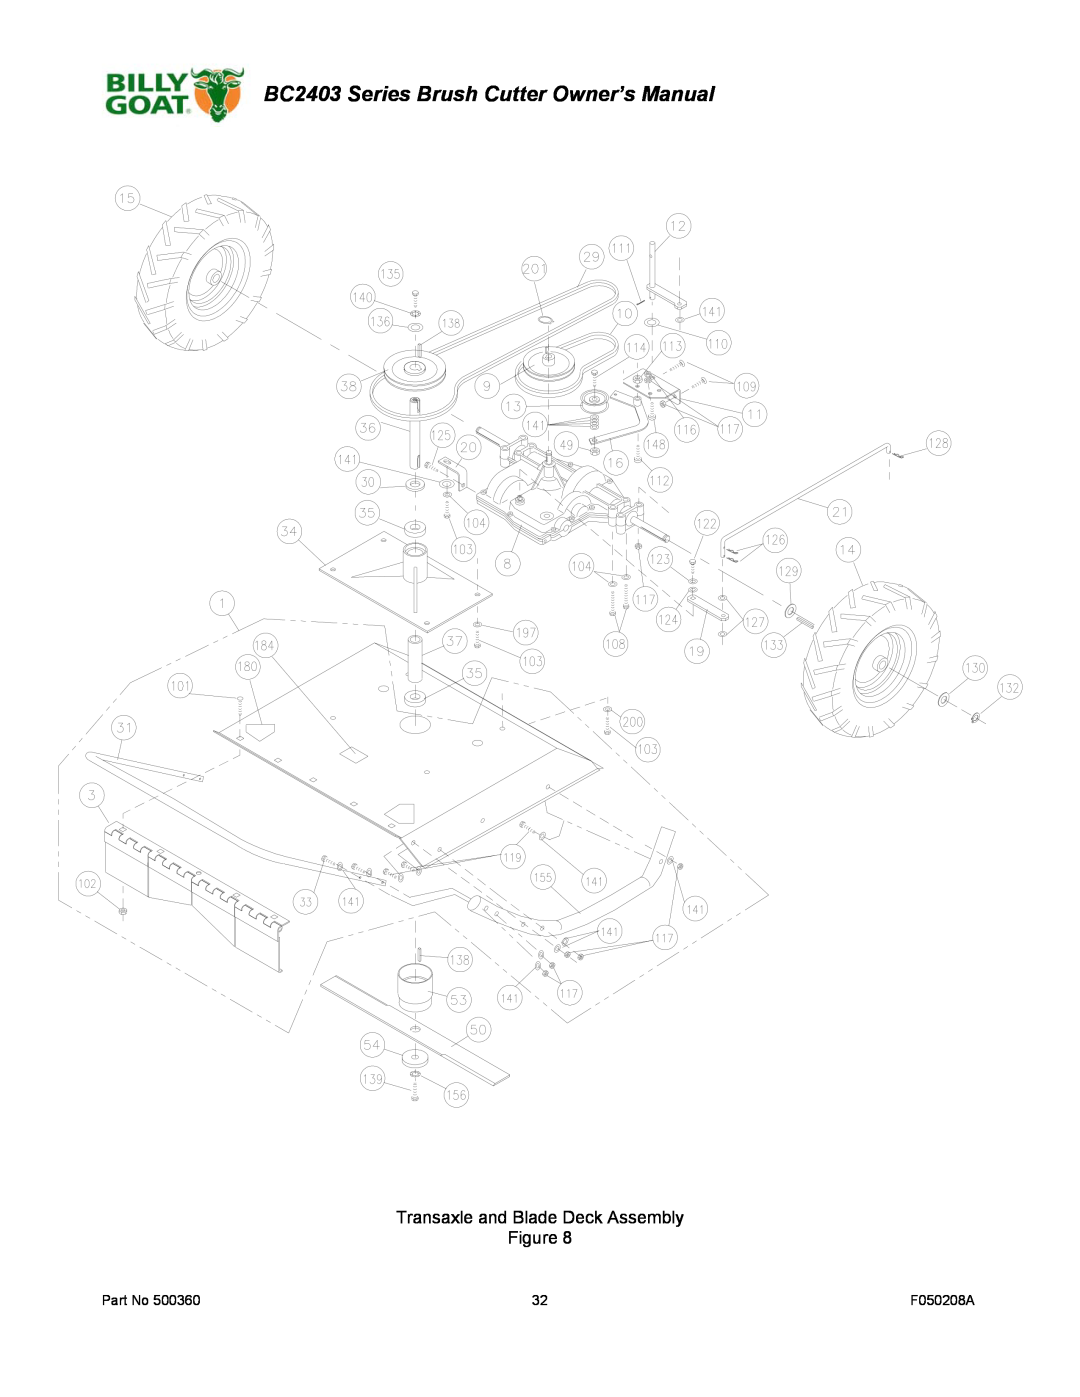 Billy Goat owner manual BC2403 Series Brush Cutter Owner’s Manual, Transaxle and Blade Deck Assembly, F050208A 